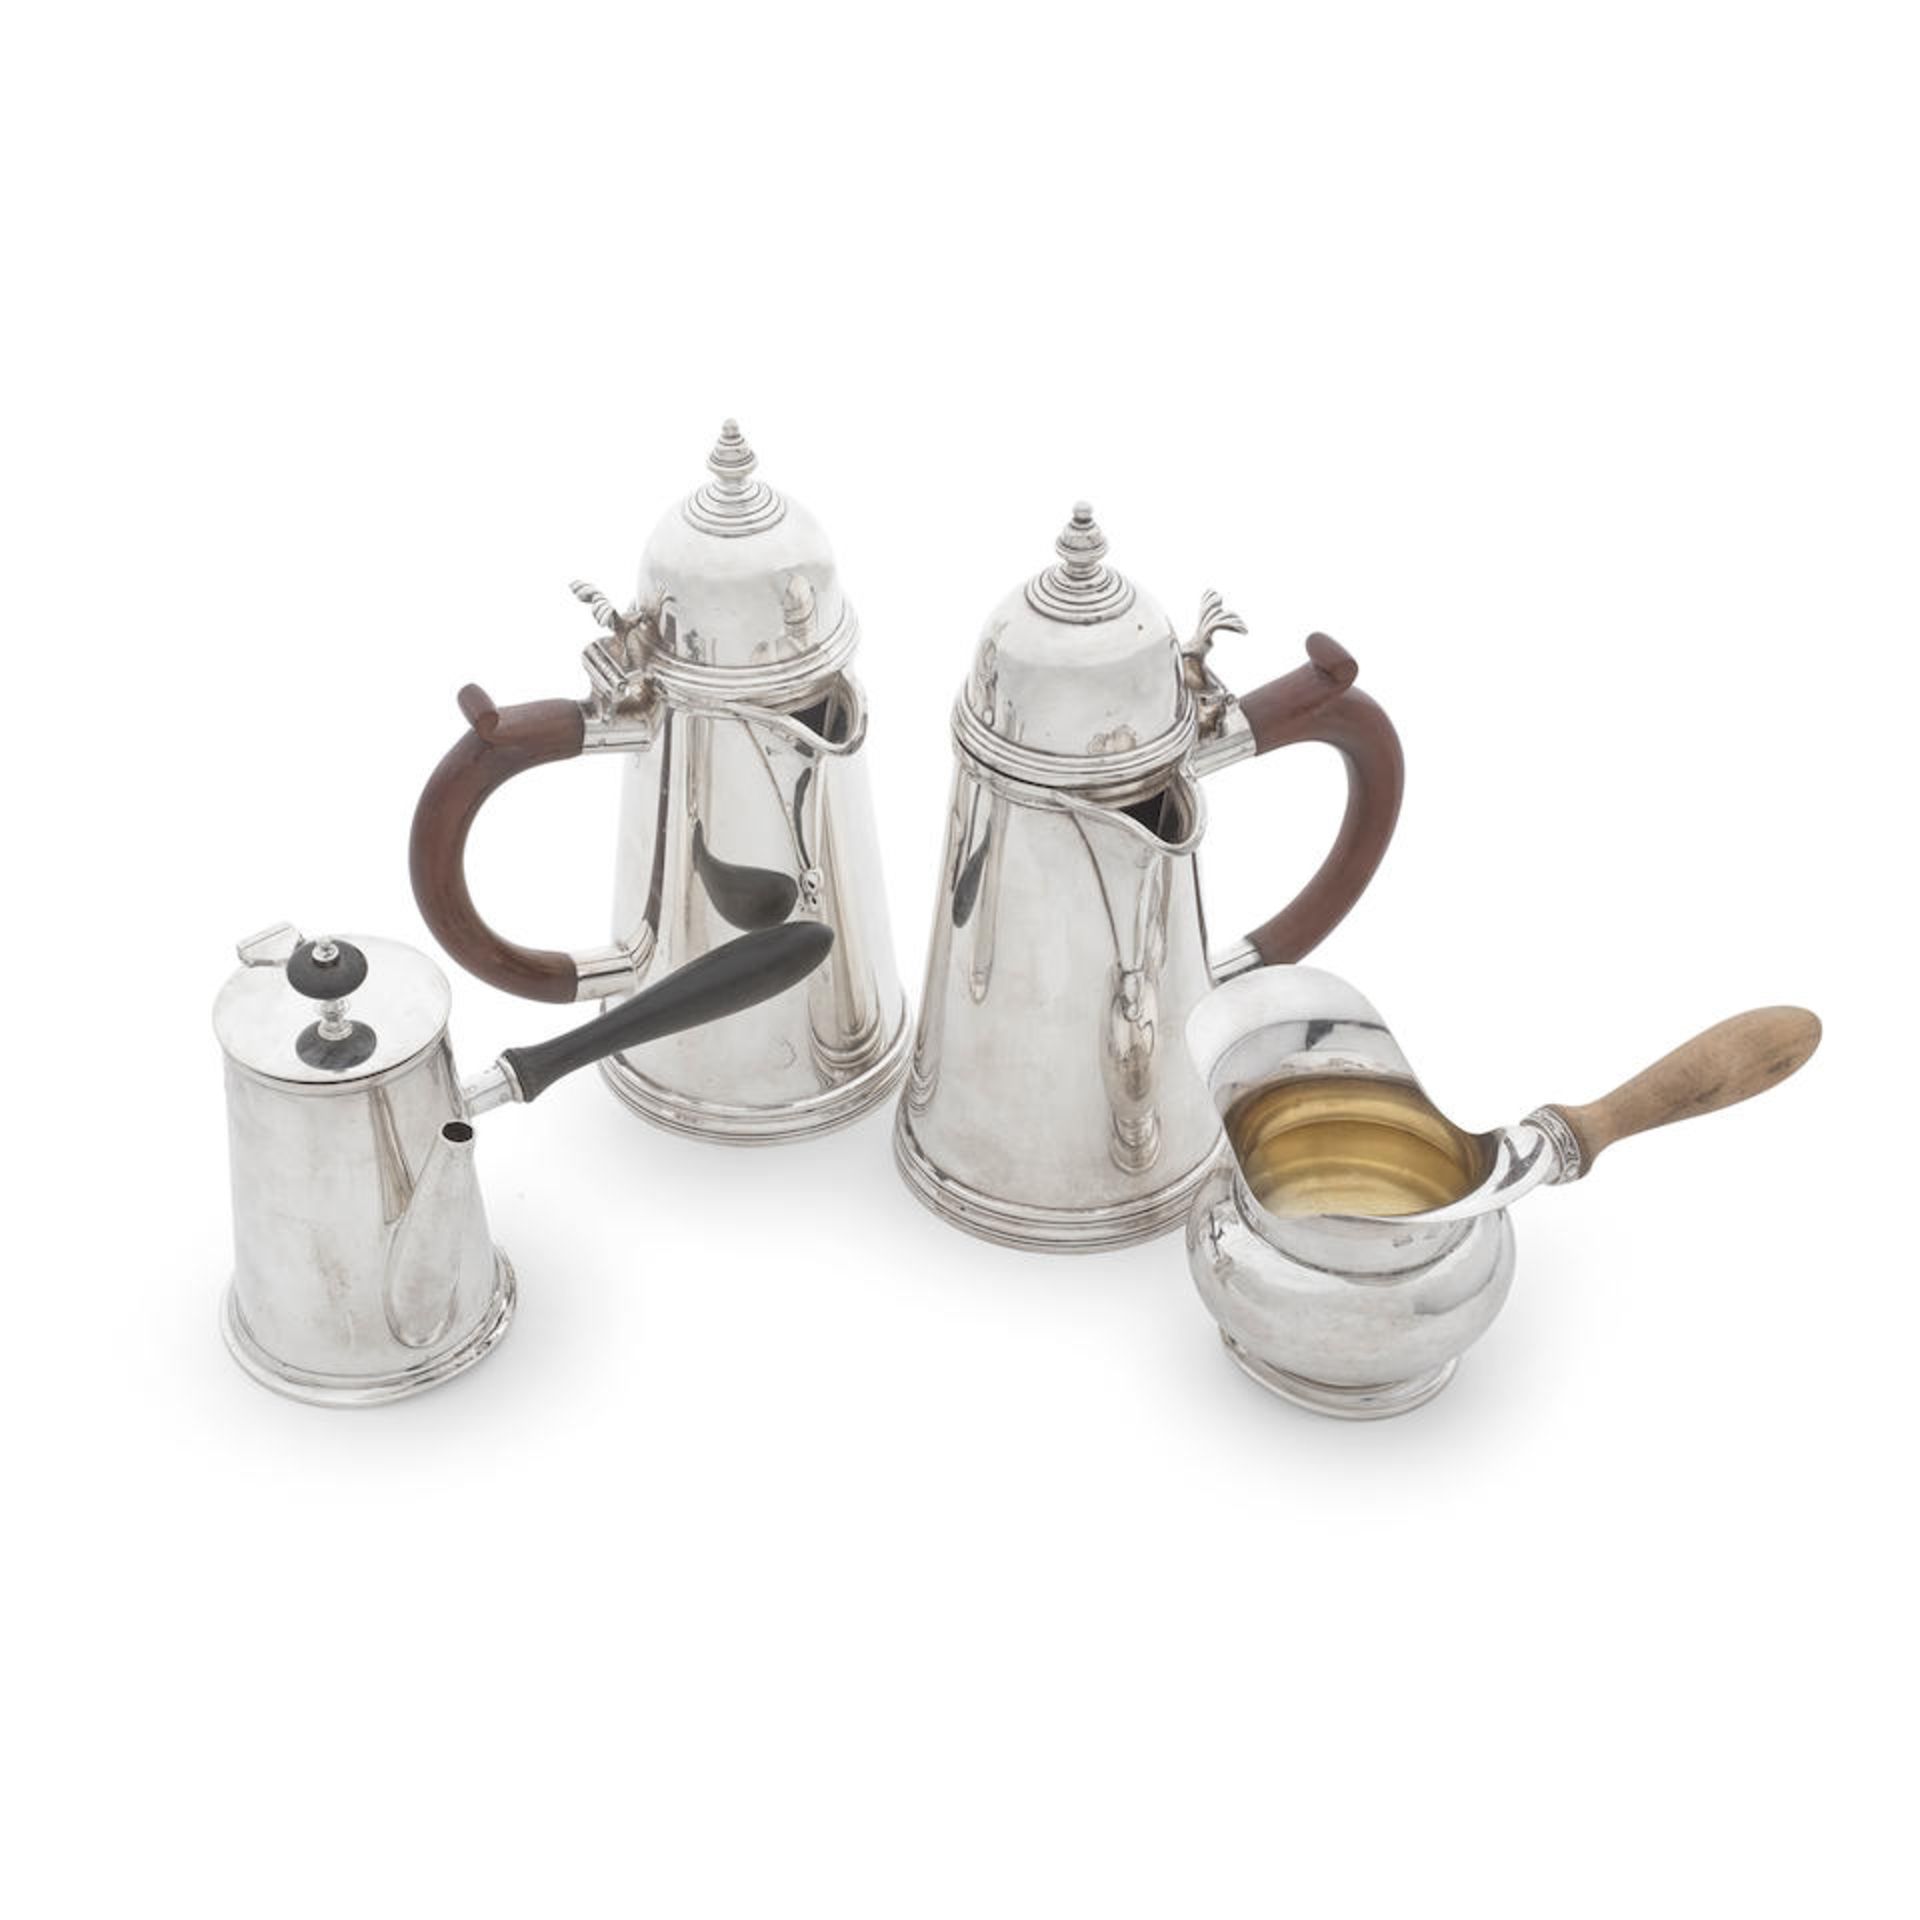 Two silver café au lait pots Atkin Brothers, Sheffield 1926 /1927 together with a small si...